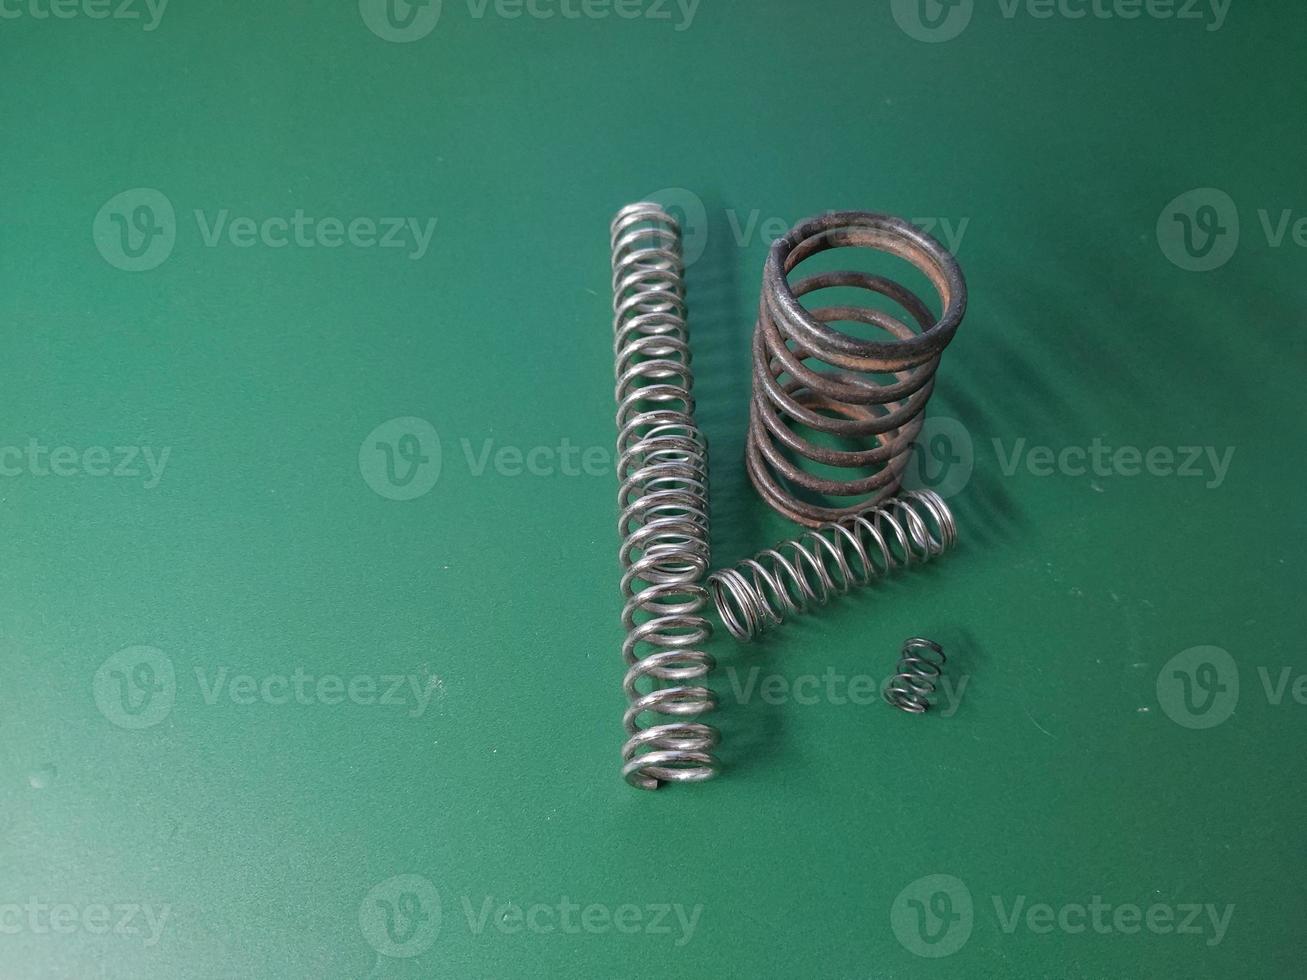 Metal spring for technical products photo